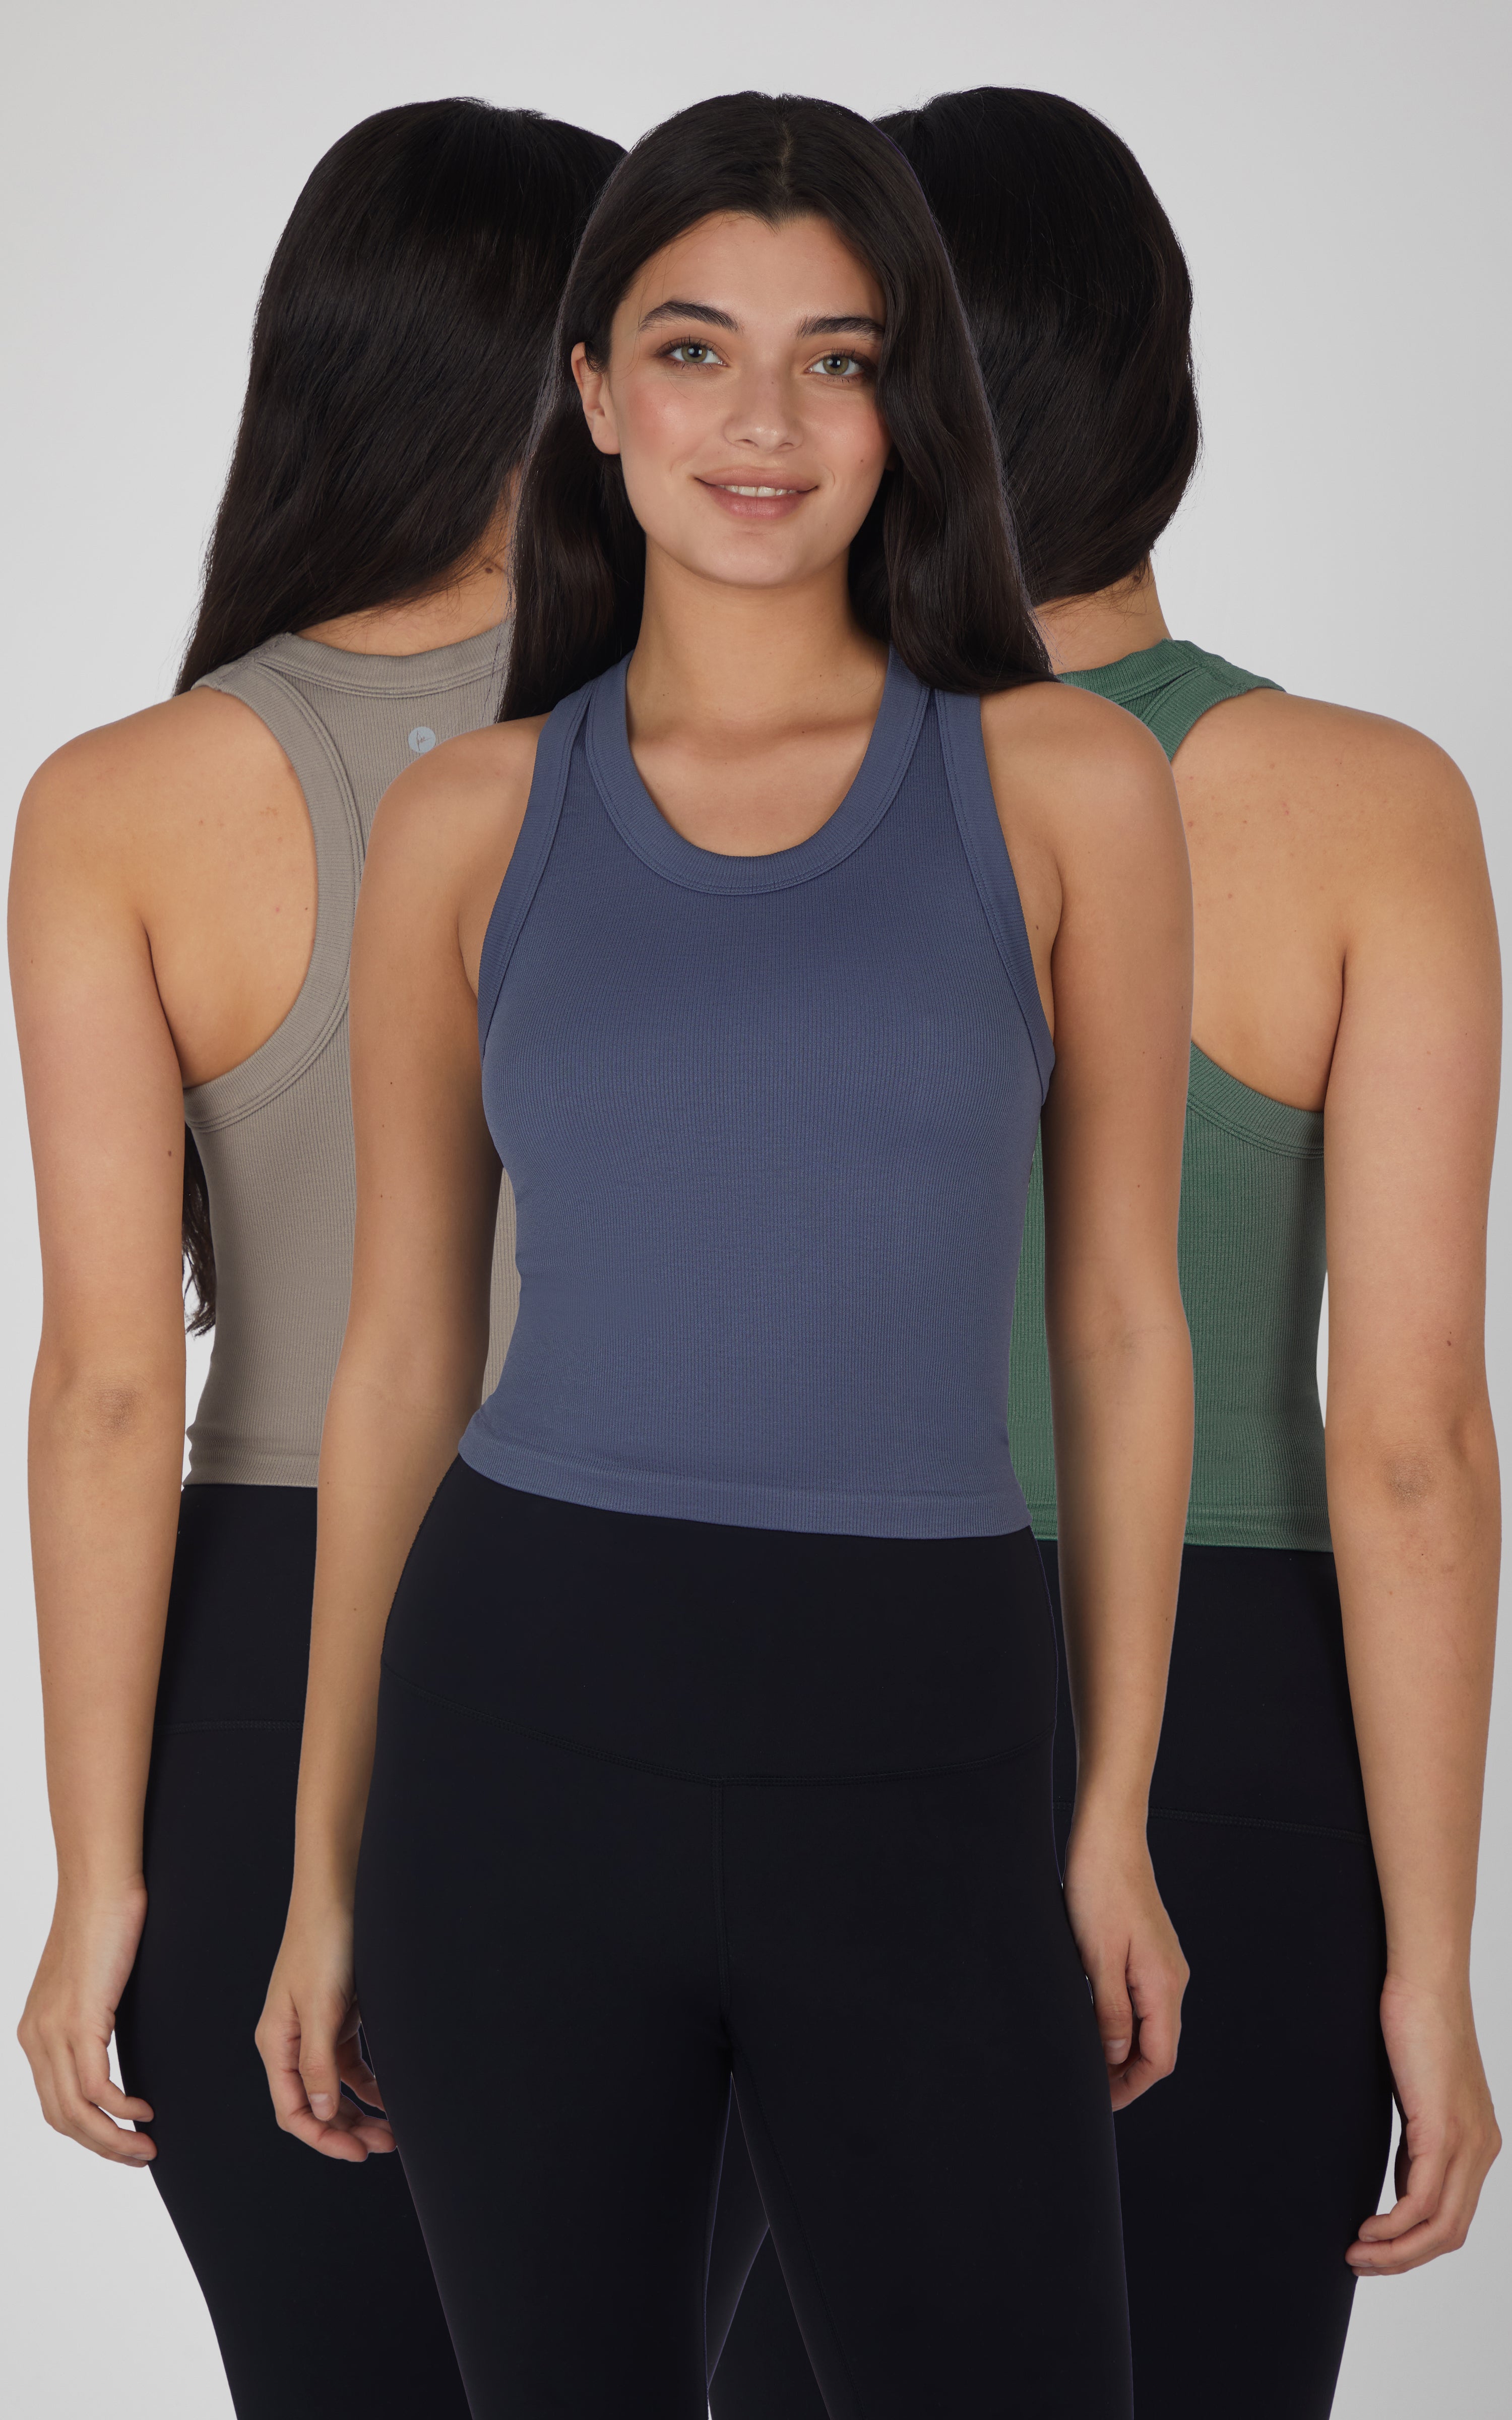 90 Degree By Reflex Workout Tank Tops & Camisoles